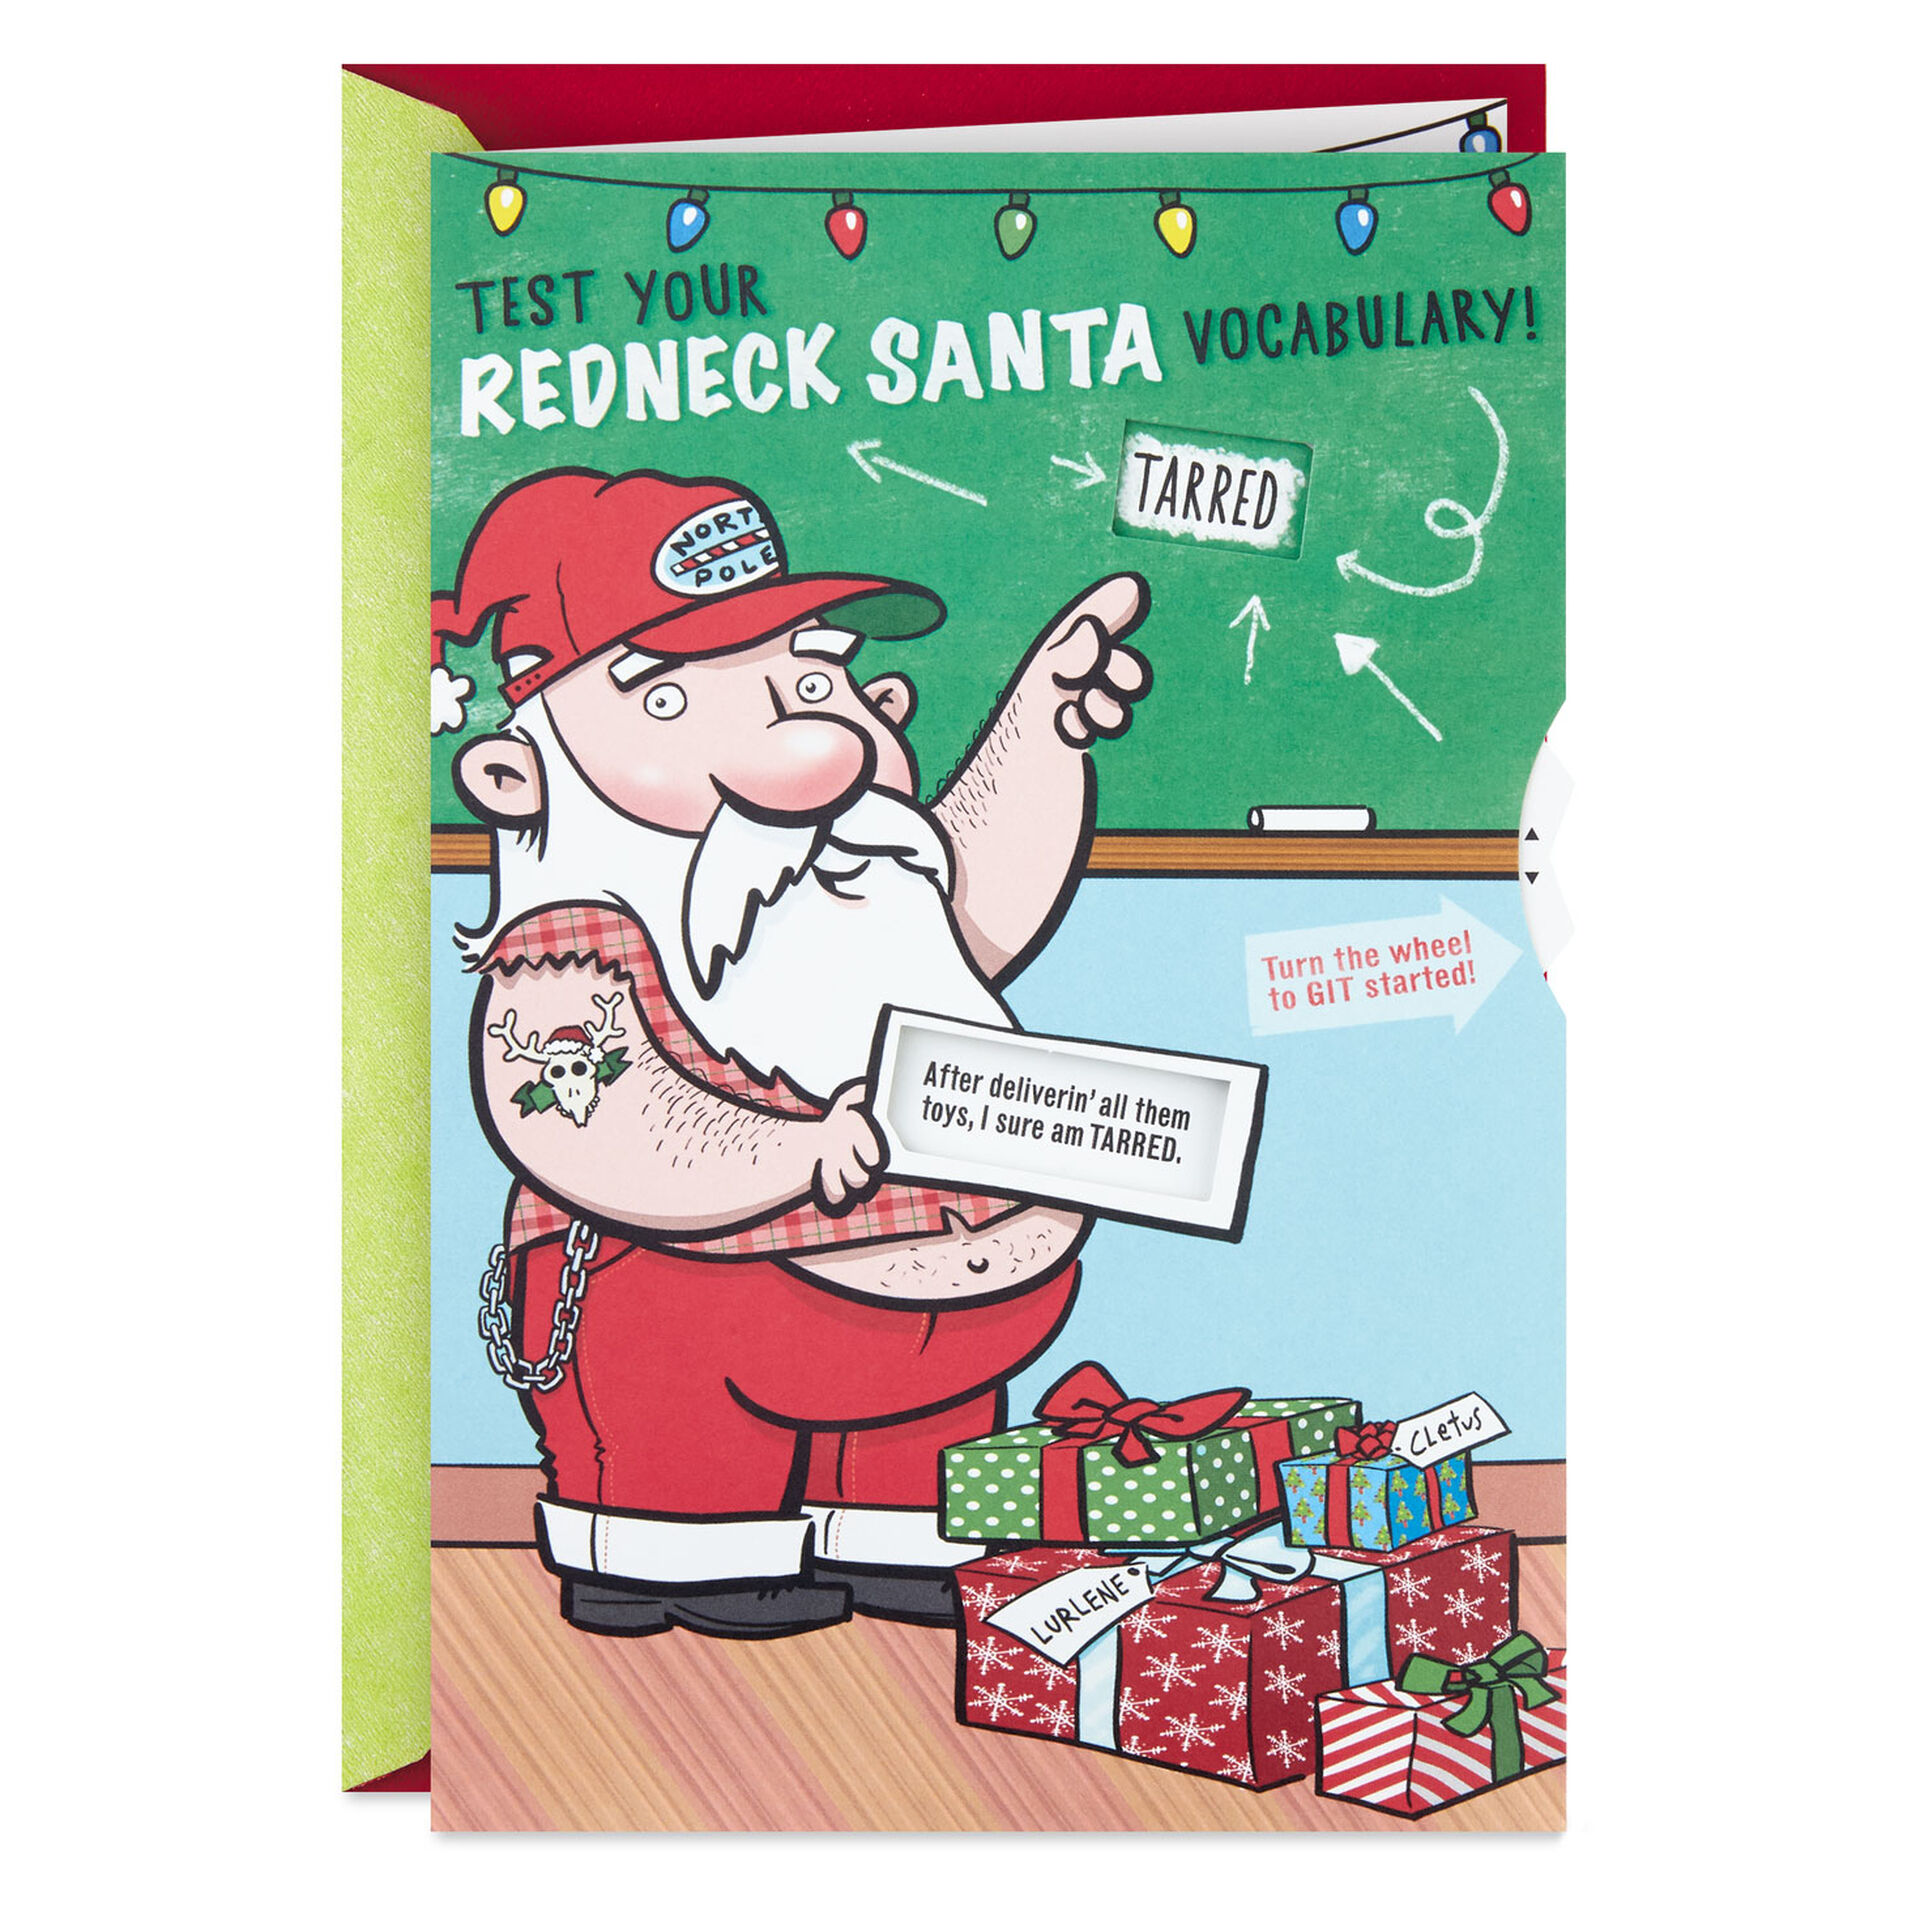 redneck-santa-test-interactive-wheel-funny-christmas-card-with-sound